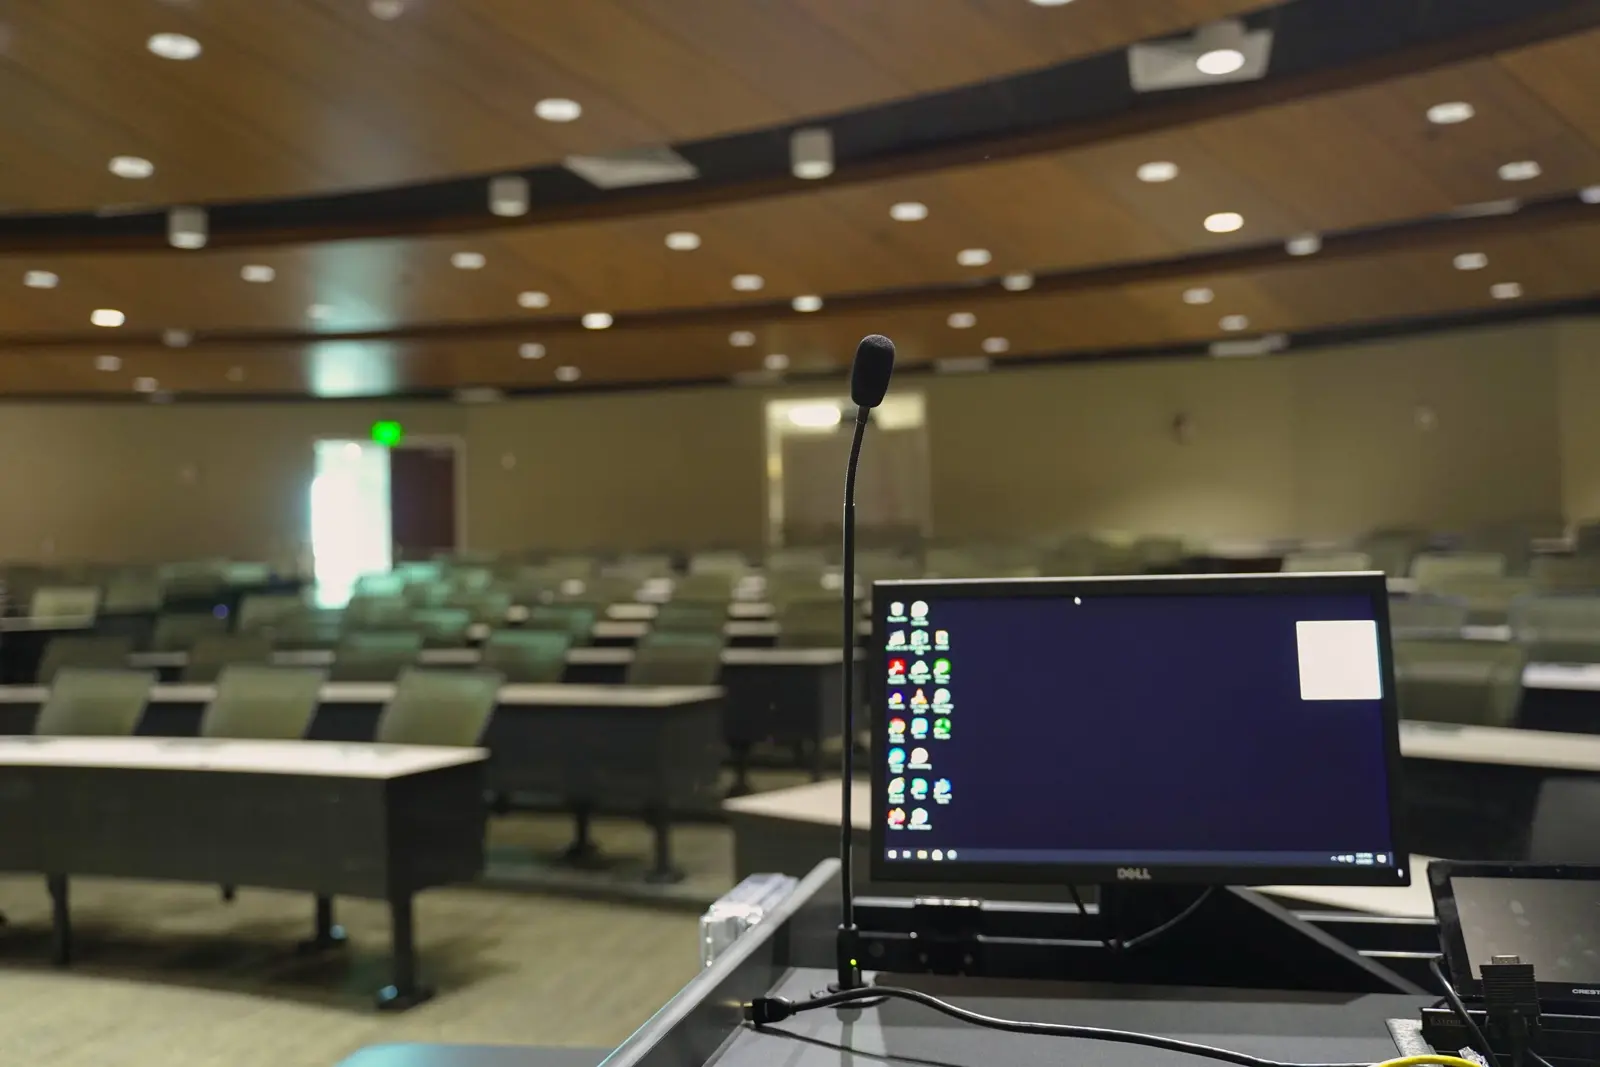 CAMLS A lecture hall with rows of empty seats is pictured. In the foreground, there's a podium equipped with a microphone and a Dell monitor displaying a desktop with various icons. The hall's curved wooden ceiling and a partially visible green exit sign are also seen.